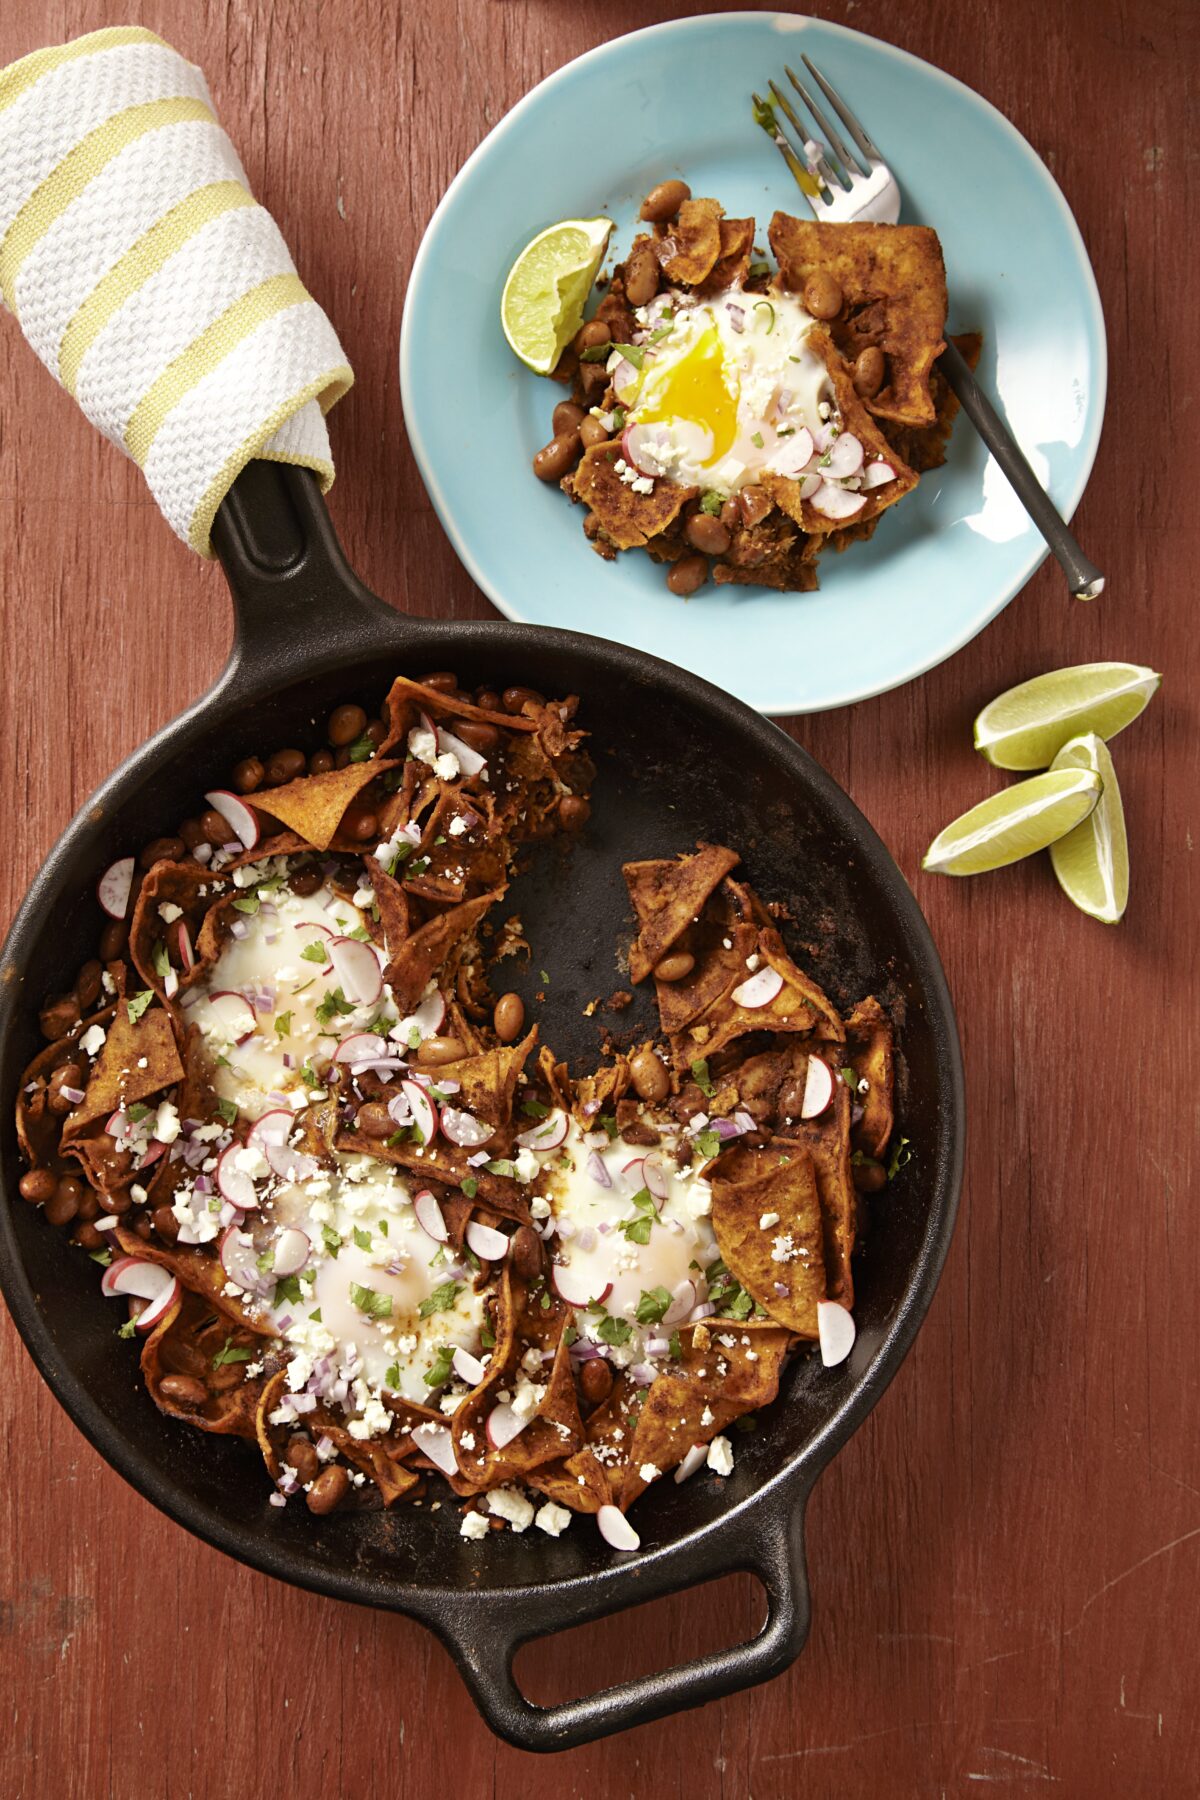 This dish is a great way to use stale tortillas. (Peter Ardito/TNS)